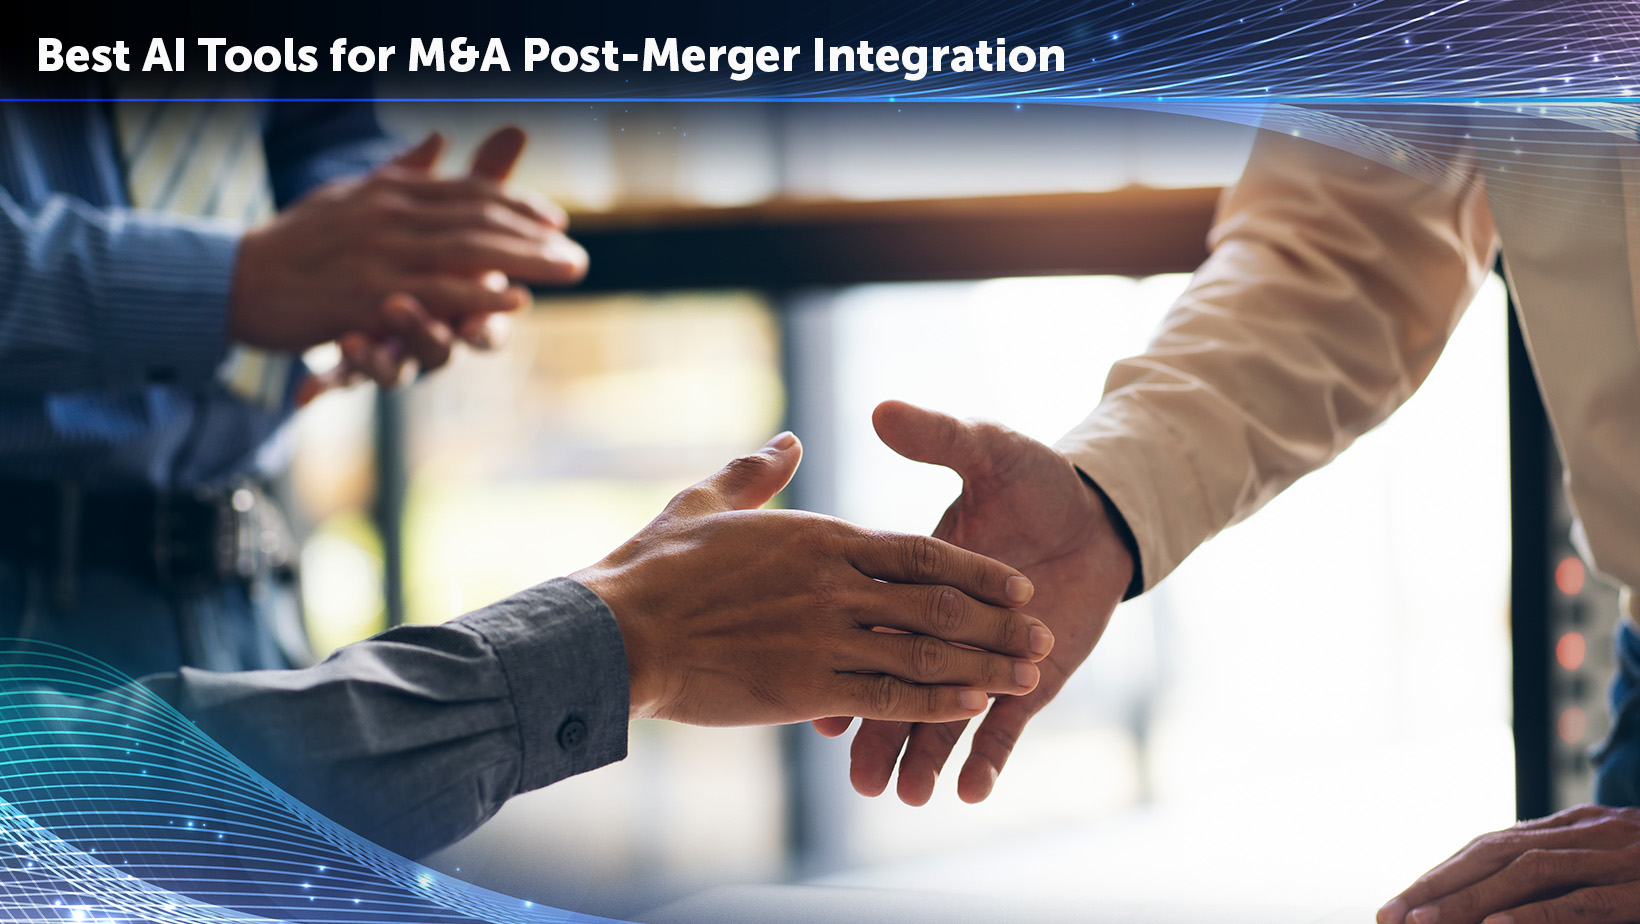 Best AI Tools for Post-Merger Integration